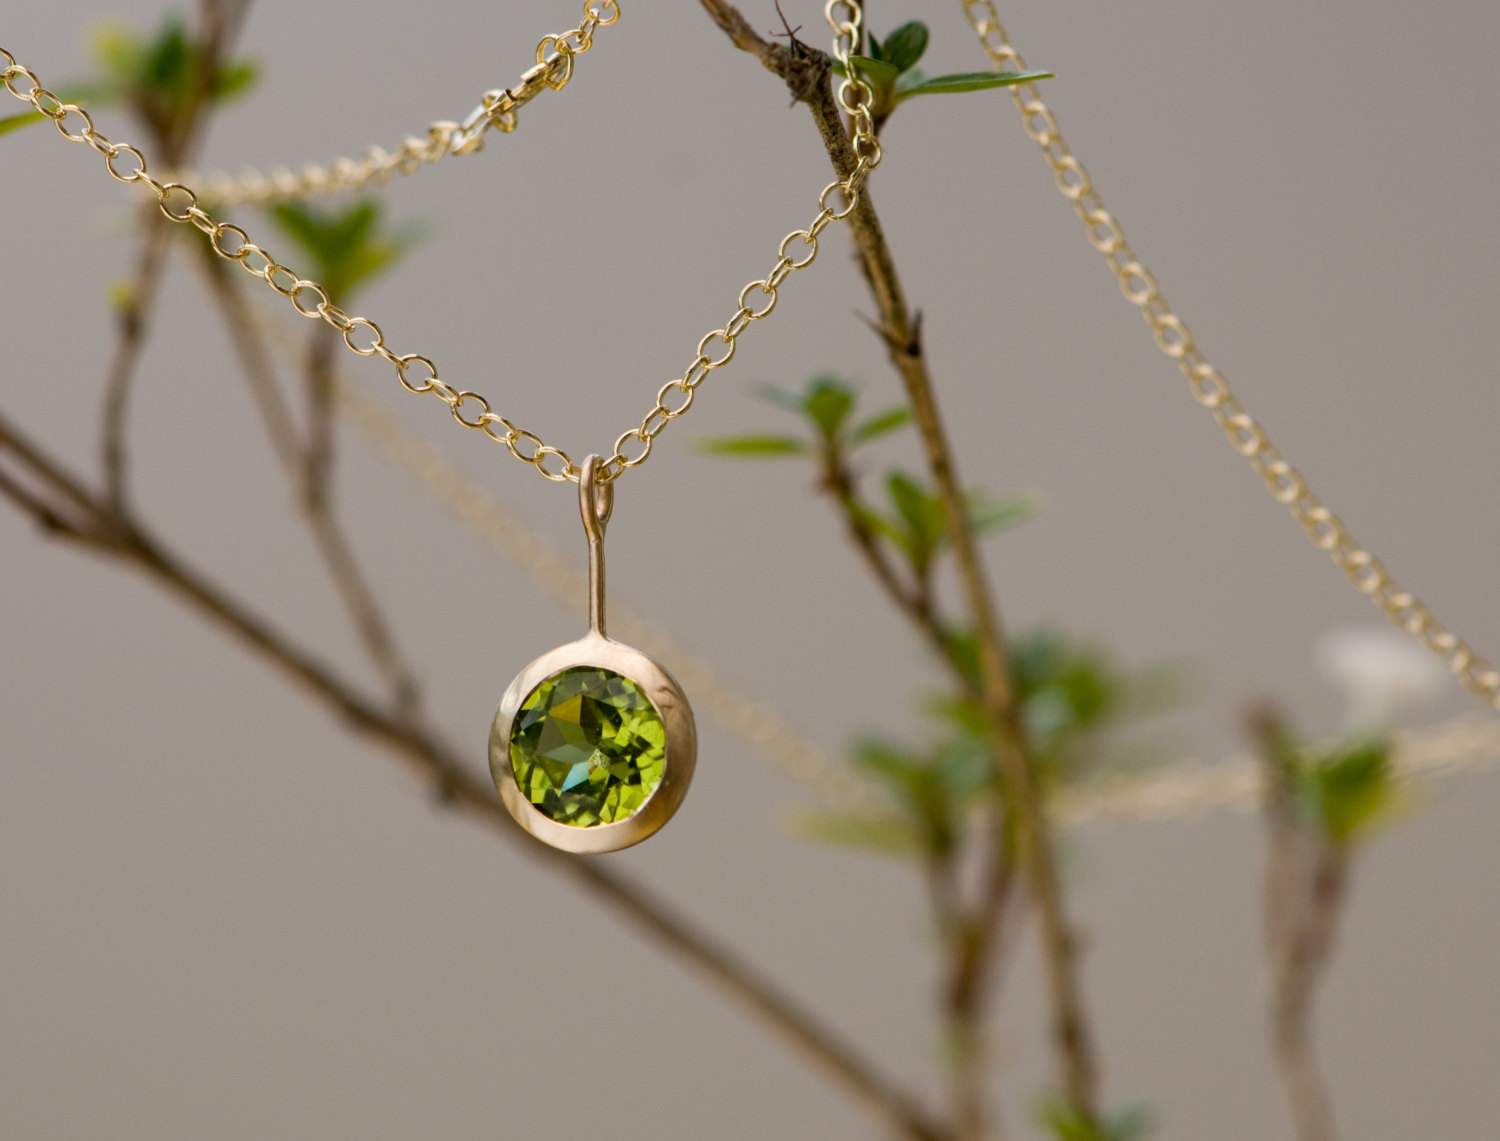 Green Peridot Lollipop necklace, set in 18k yellow gold on an 18k yellow gold chain. Designed and handmade in Cornwall, UK by William White.